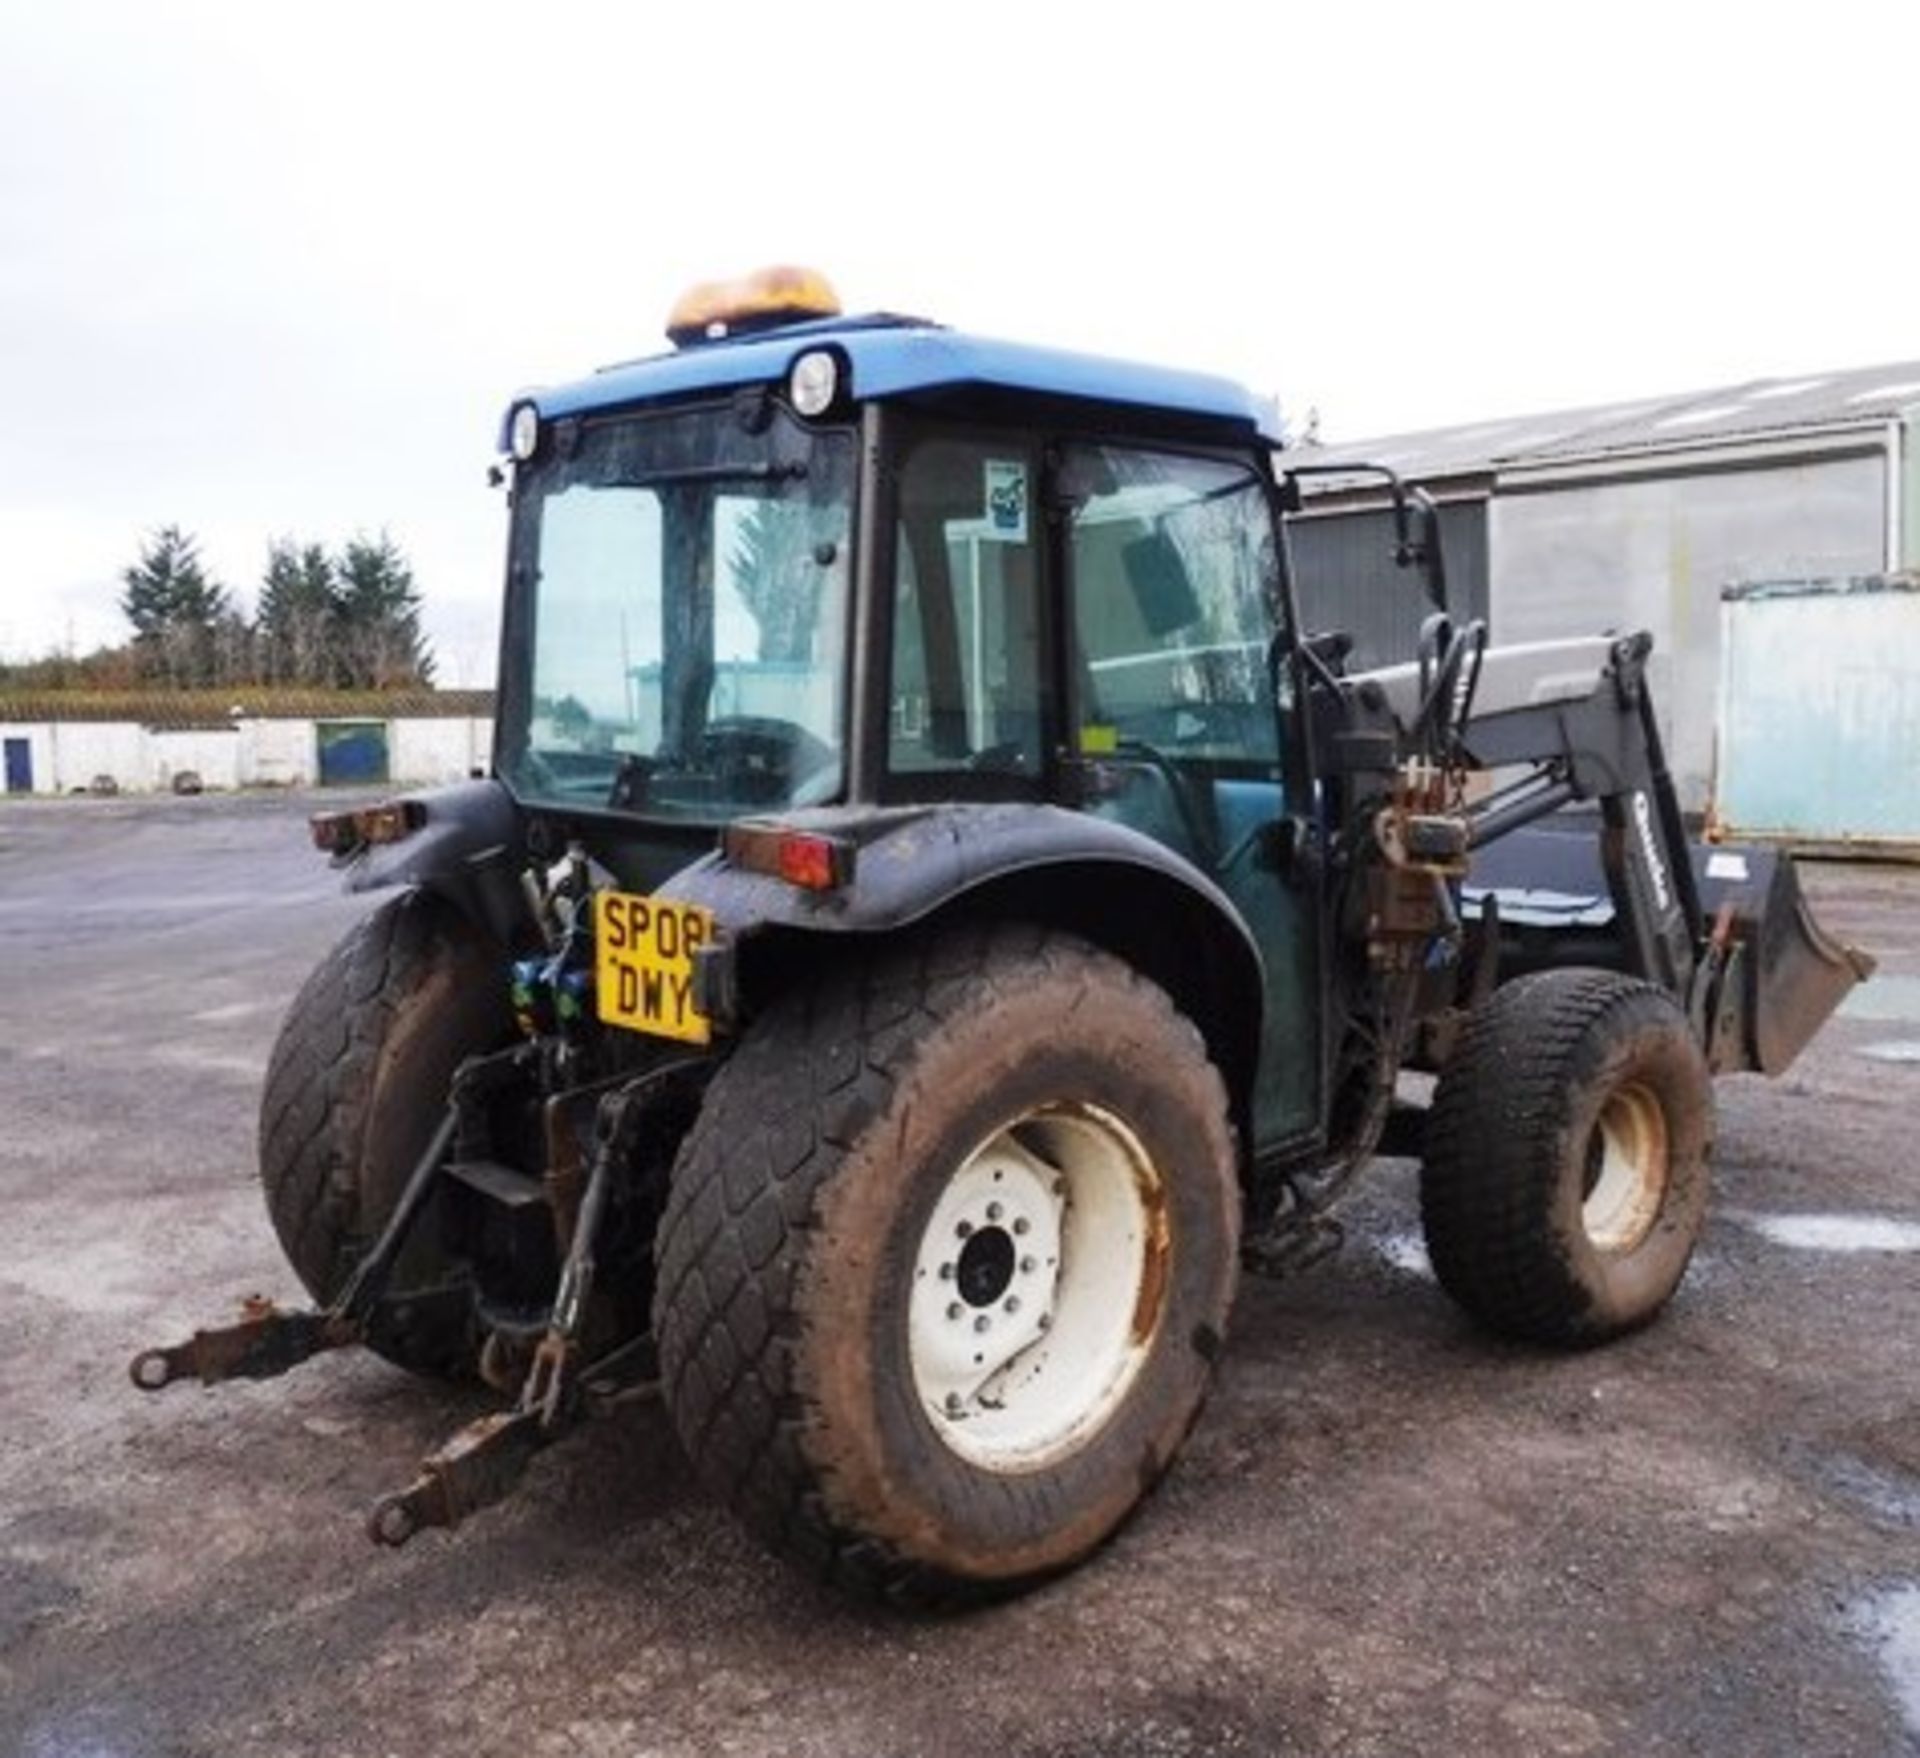 2008 NEW HOLLAND TN60 TRACTOR. REG NO SP08 DWY. SN 111054. GVW(TONNES) 4497, 3062HRS (NOT VERIFIED) - Image 40 of 40